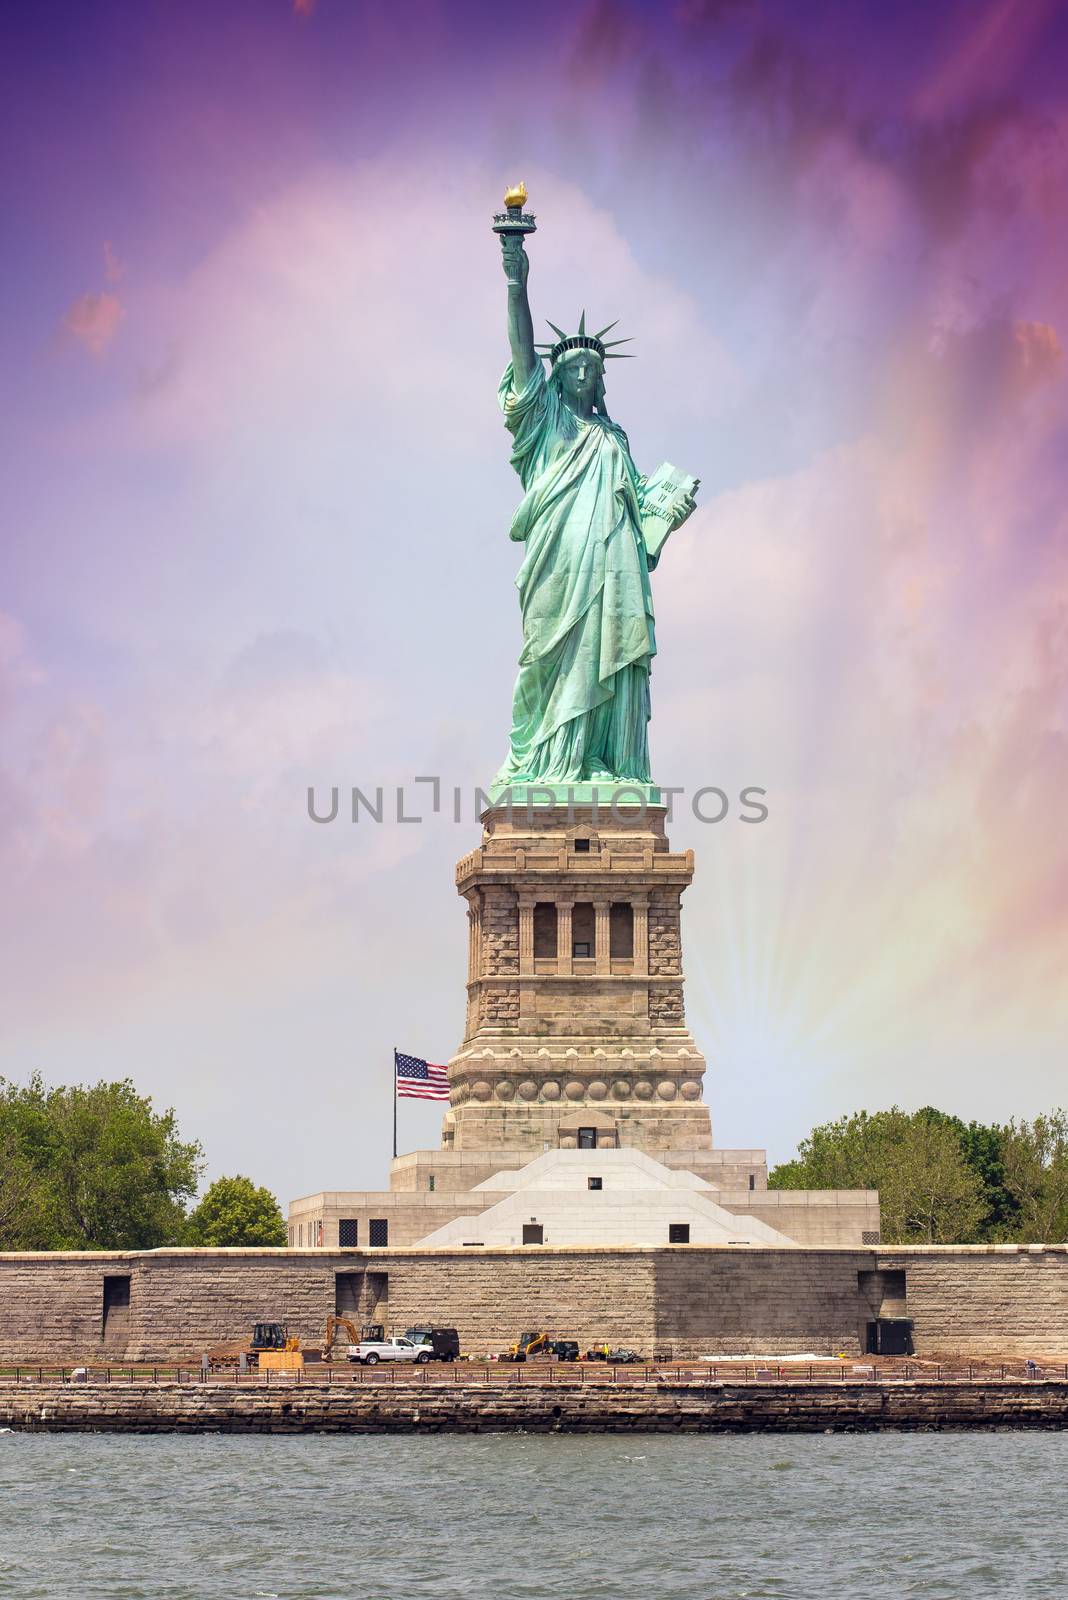 Amazing view of Statue of Liberty in New York.